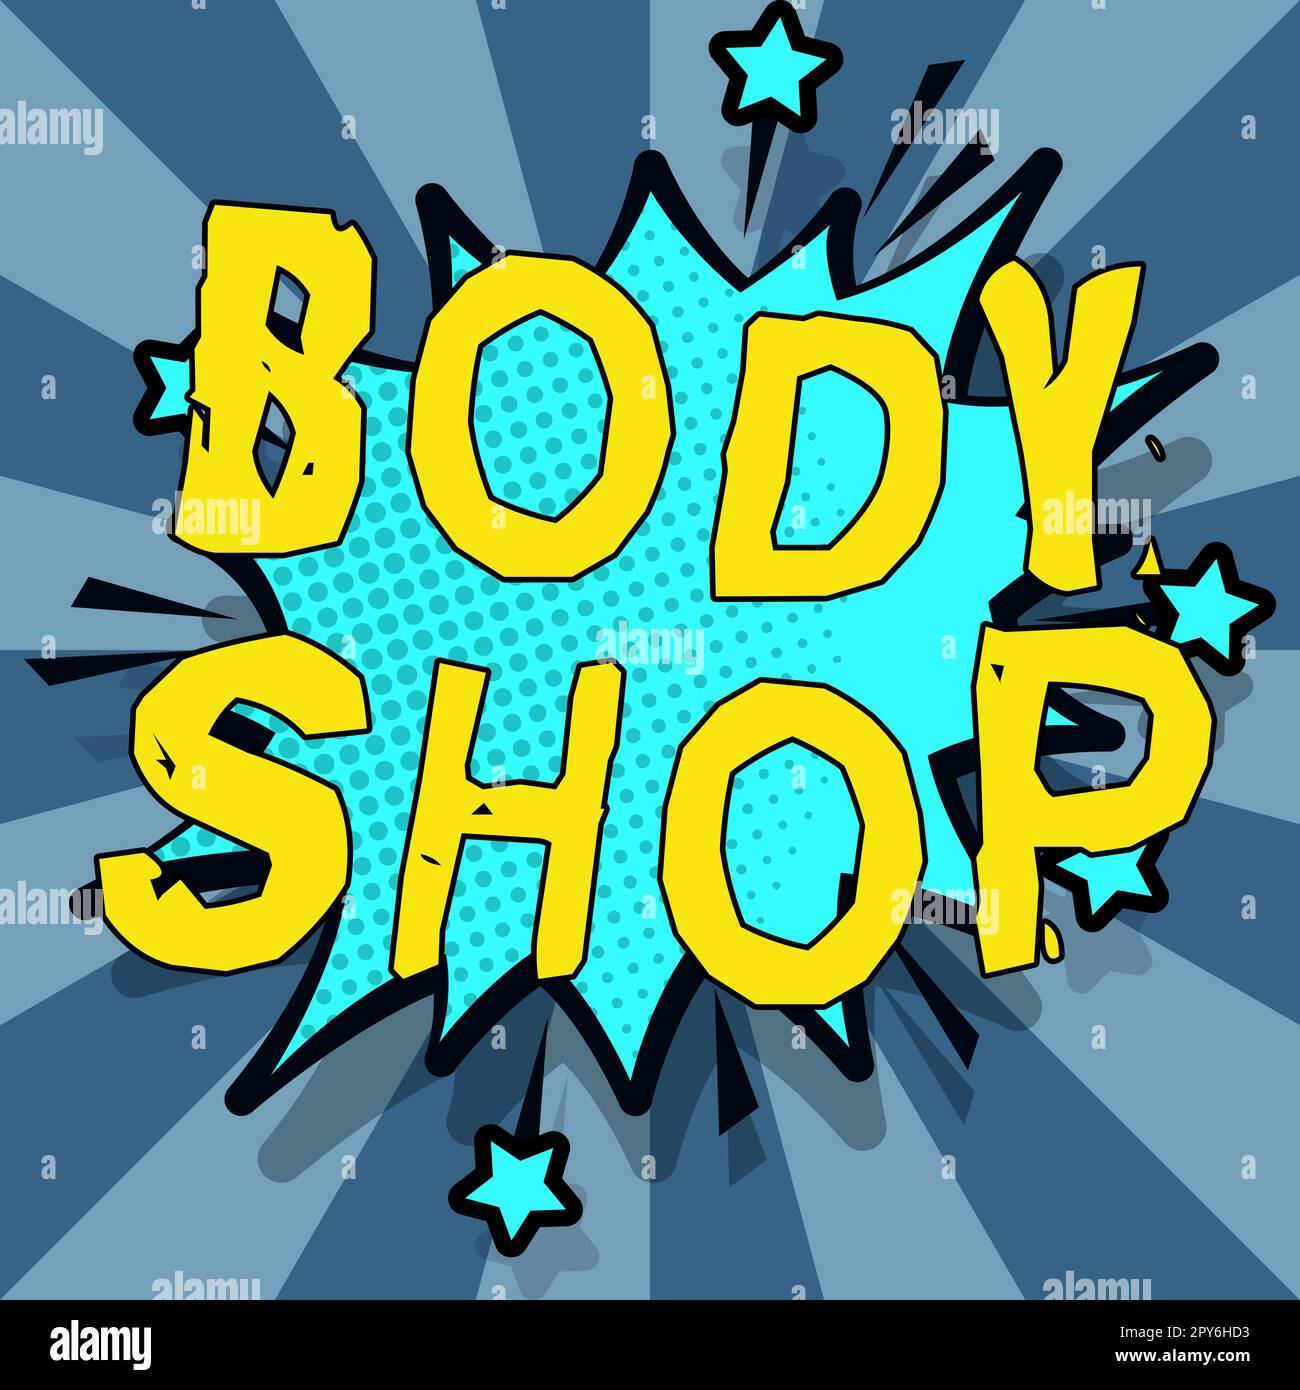 Conceptual display Body Shop. Business showcase a shop where automotive bodies are made or repaired Stock Photo